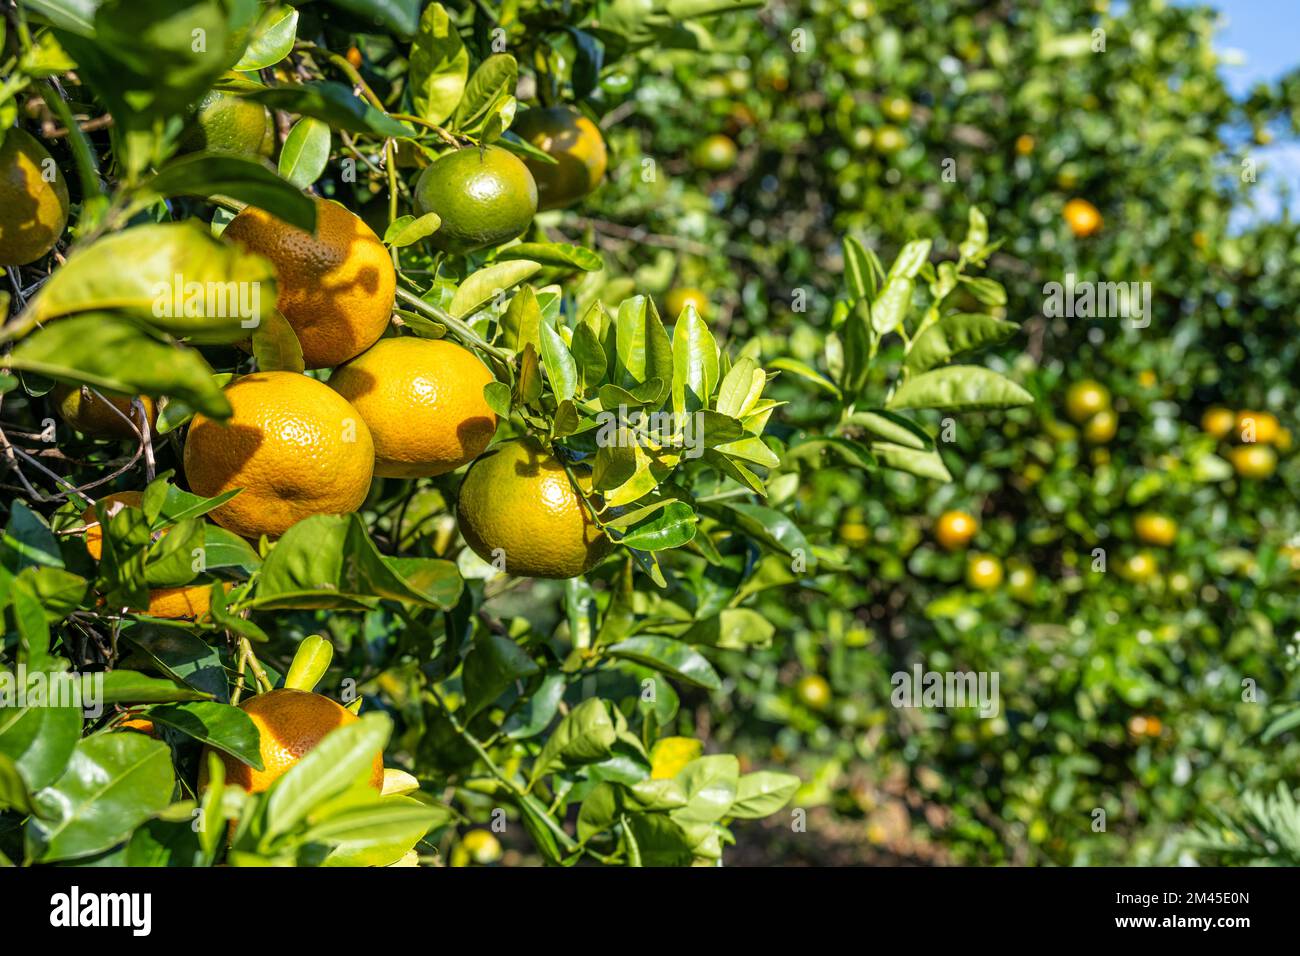 Honey tangerine trees at the Showcase of Citrus grove in Clermont, Florida. (USA) Stock Photo